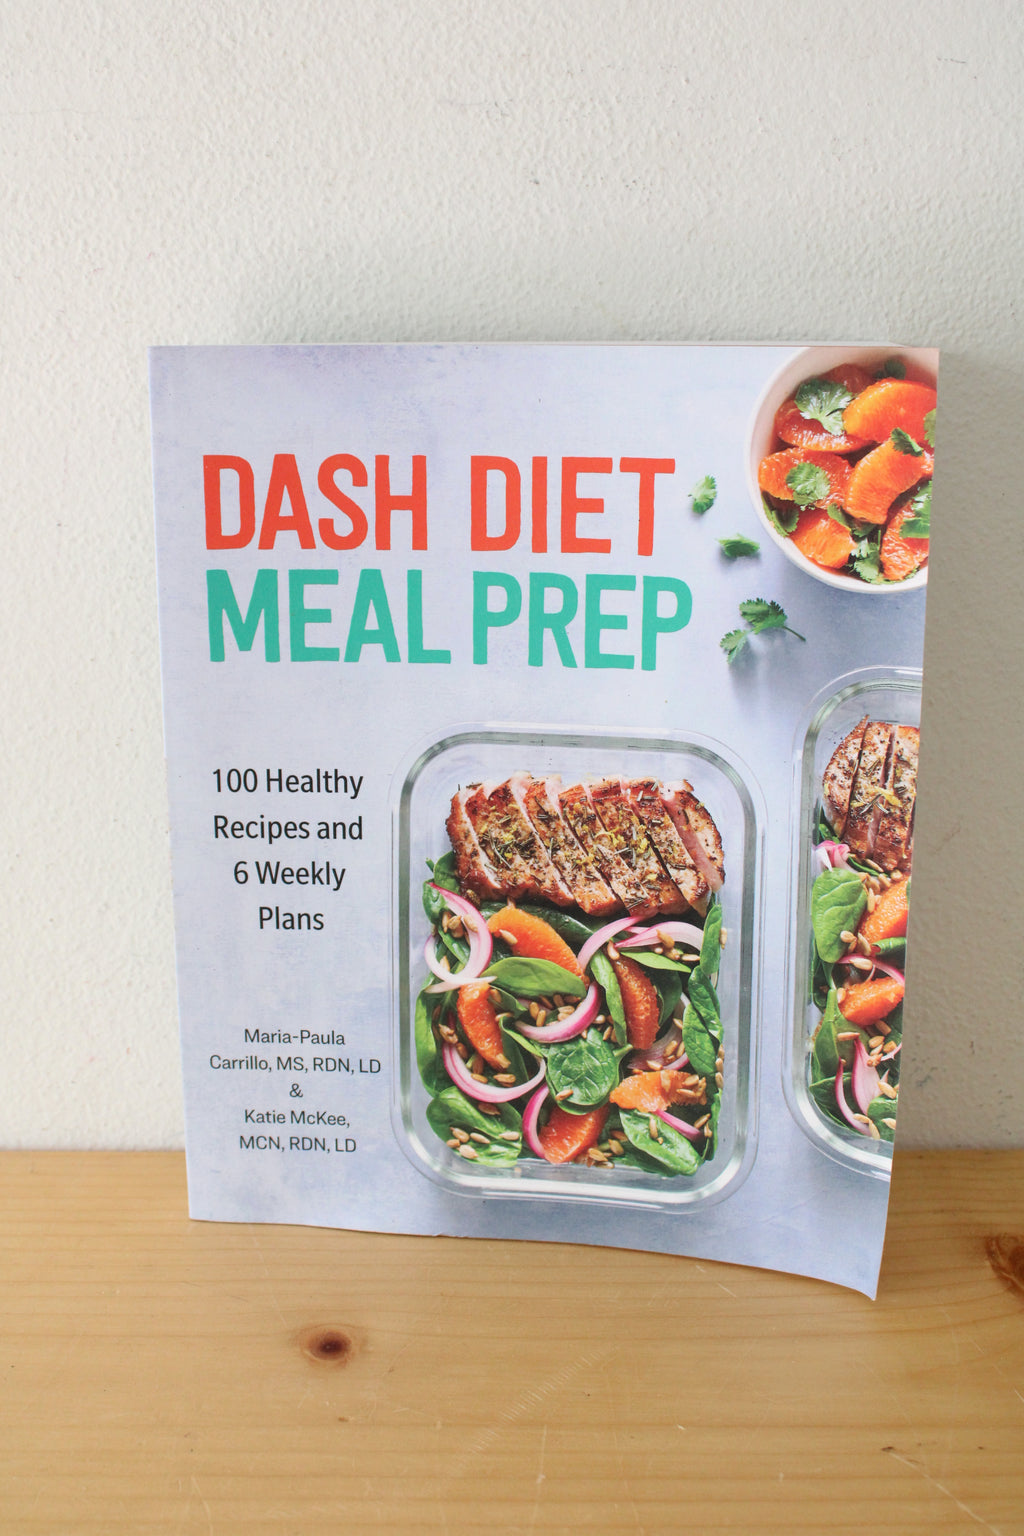 Dash Diet Meal Prep: 100 Healthy Recipes And 6 Weekly Plans. By Maria-Paula Carillo & Katie McKee